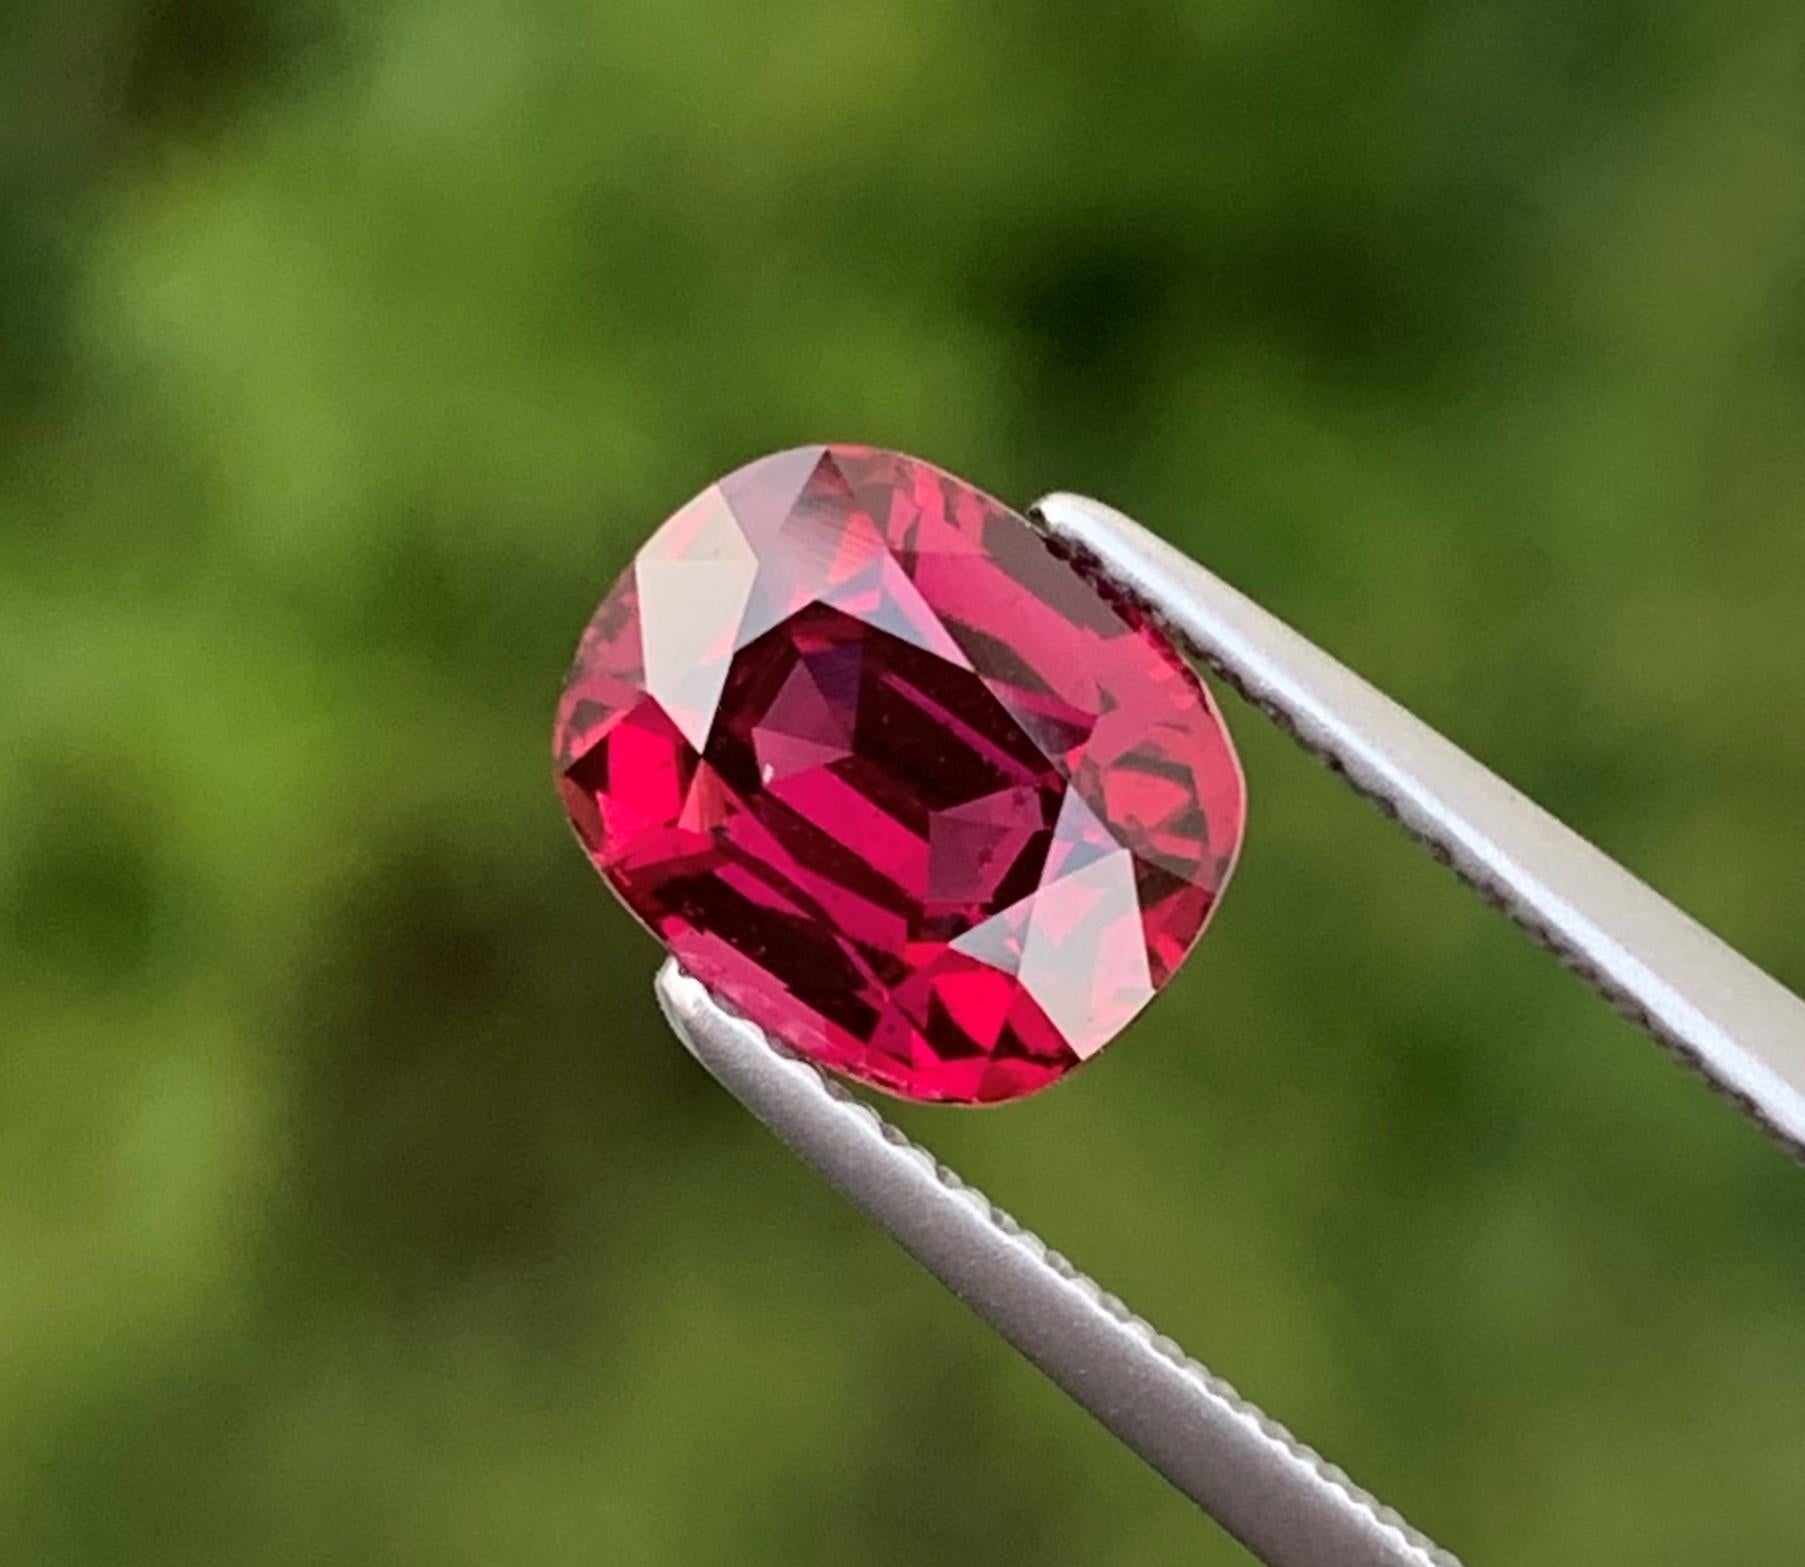 Loose Rhodolite Garnet
Weight : 2.40 Carats
Dimensions : 8.3x6.8x4.7 Mm
Origin : Tanzania Africa
Clarity : AAA Eye Clean
Shape: Cushion
Certificate: On Demand
Treatment: Non
Color: Red
.
Rhodolite is a mixture of pyrope and almandite garnets. The